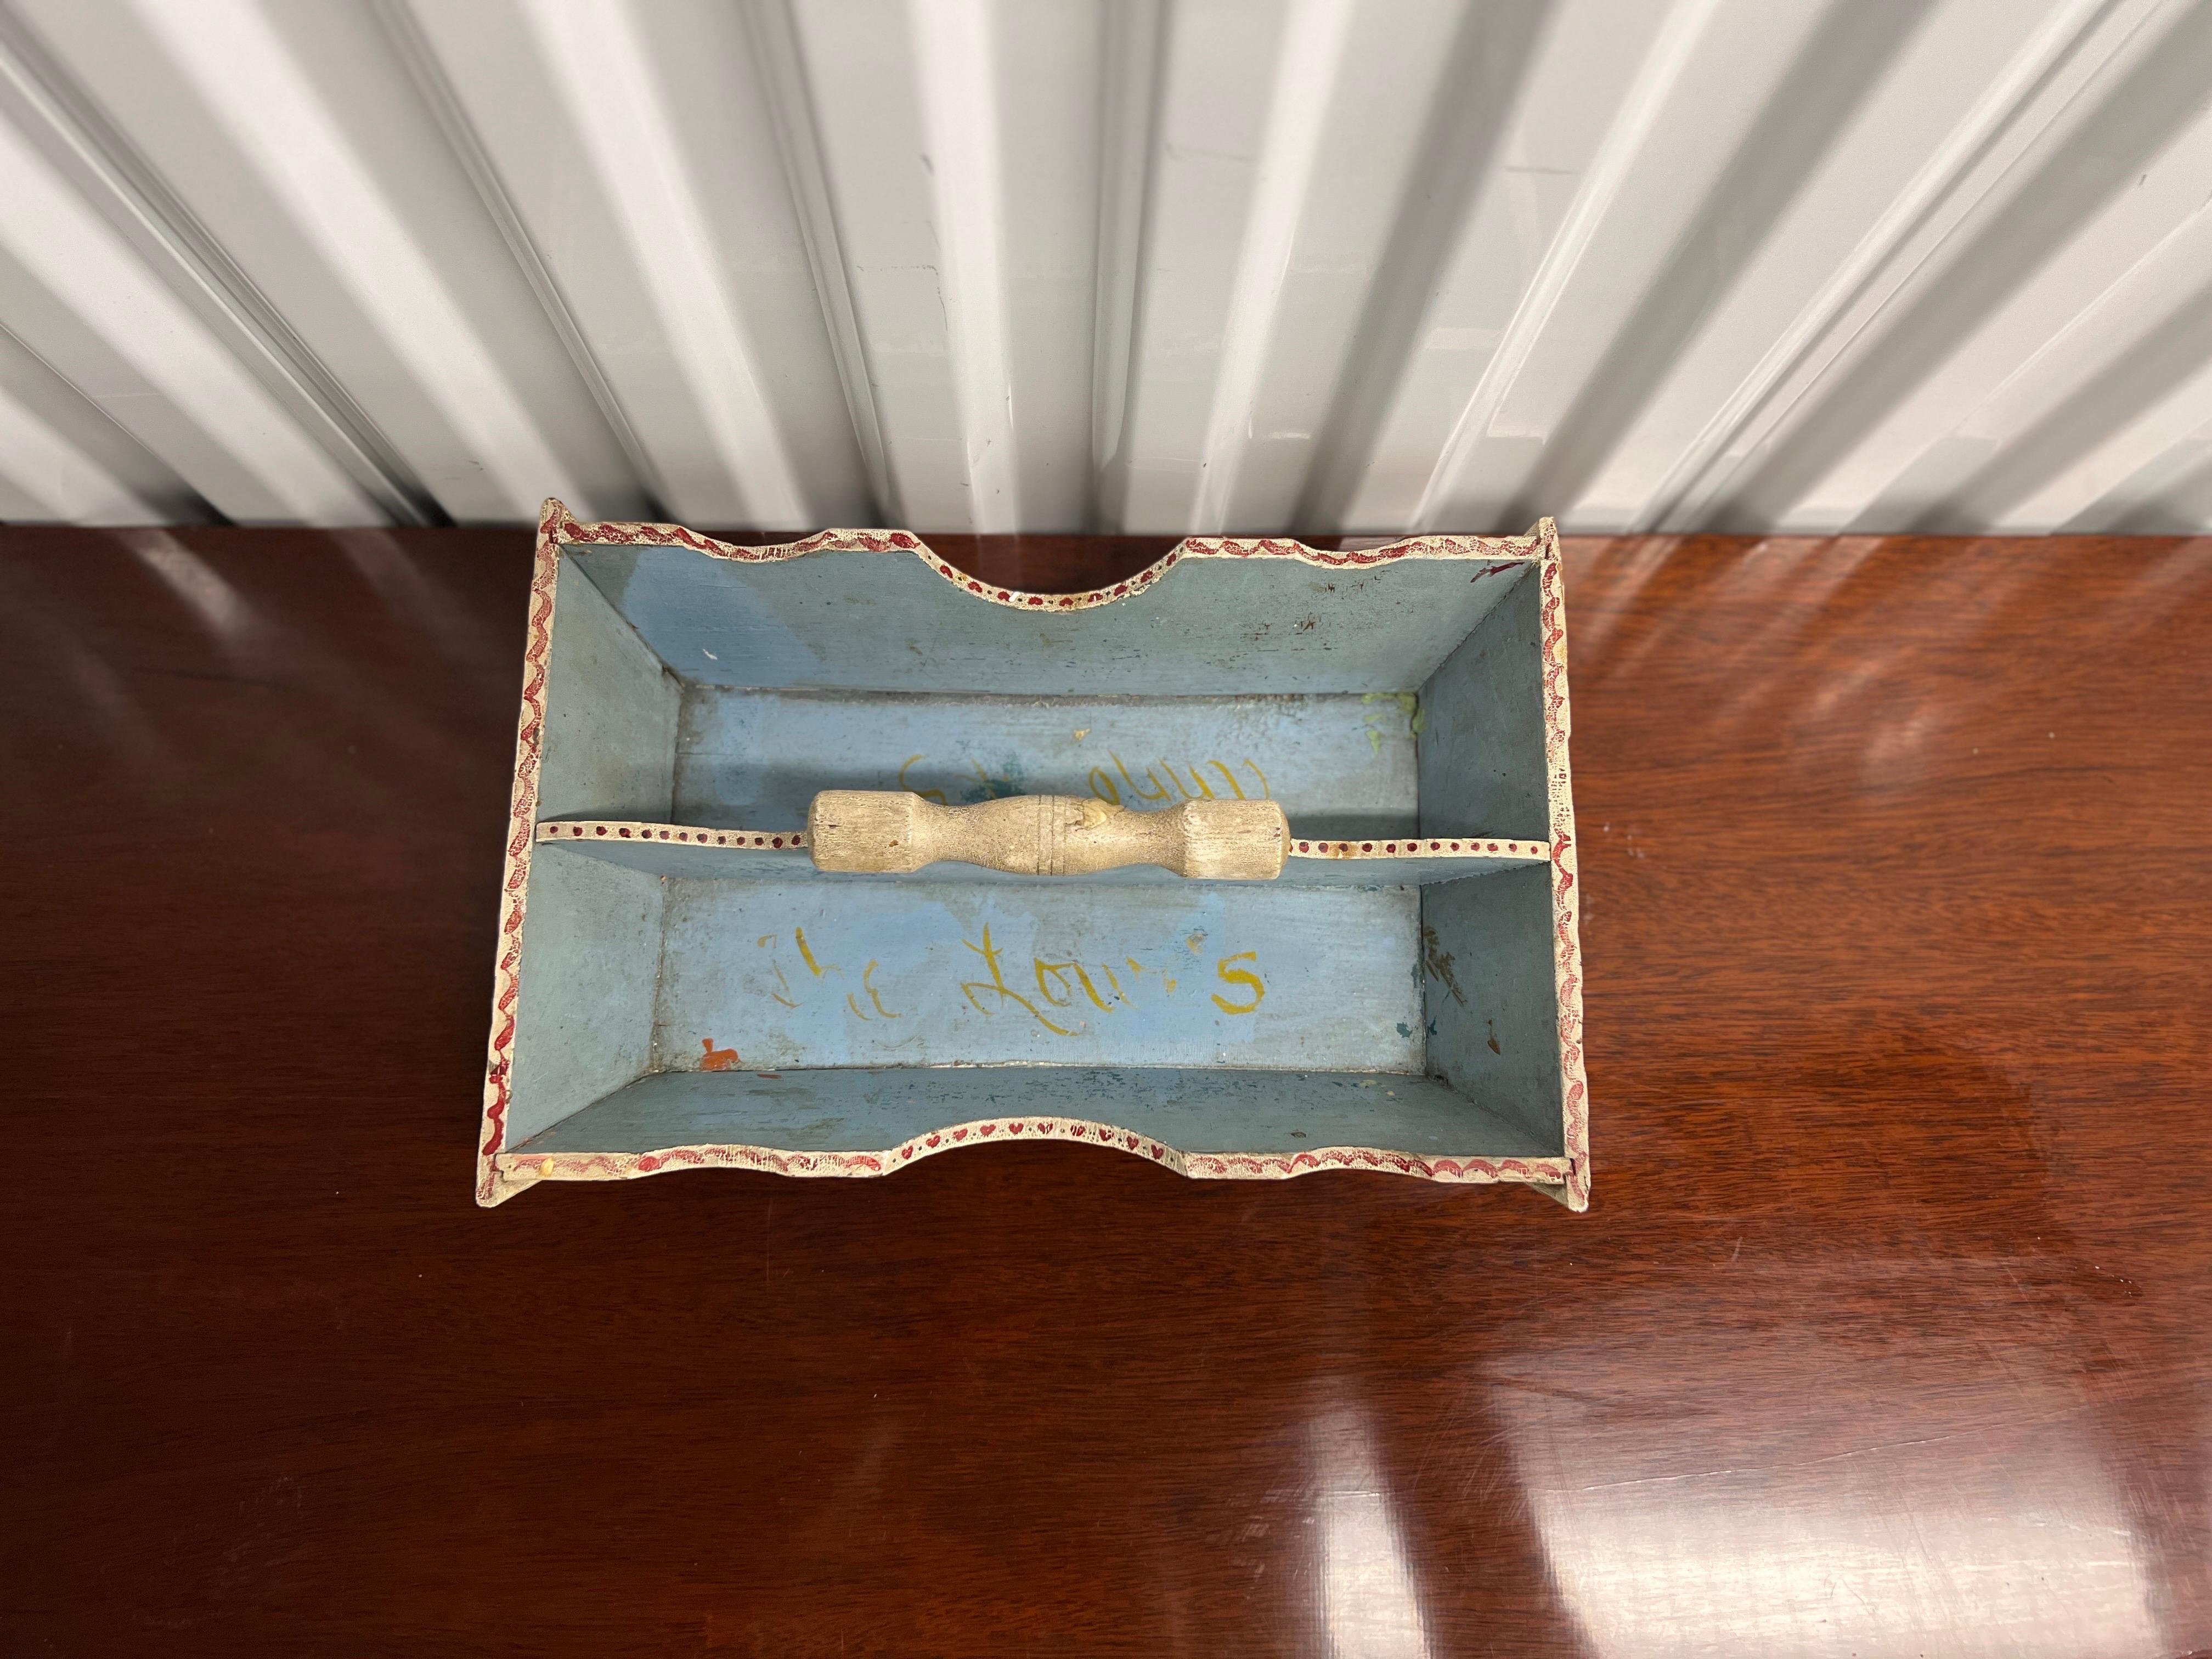 American, circa 1845.

One of the finest quality folk art cutlery trays on the market. Not only does this piece have its original robin's egg blue paint to interior and underside, but it also has a heart and geometric design across the body. 

The